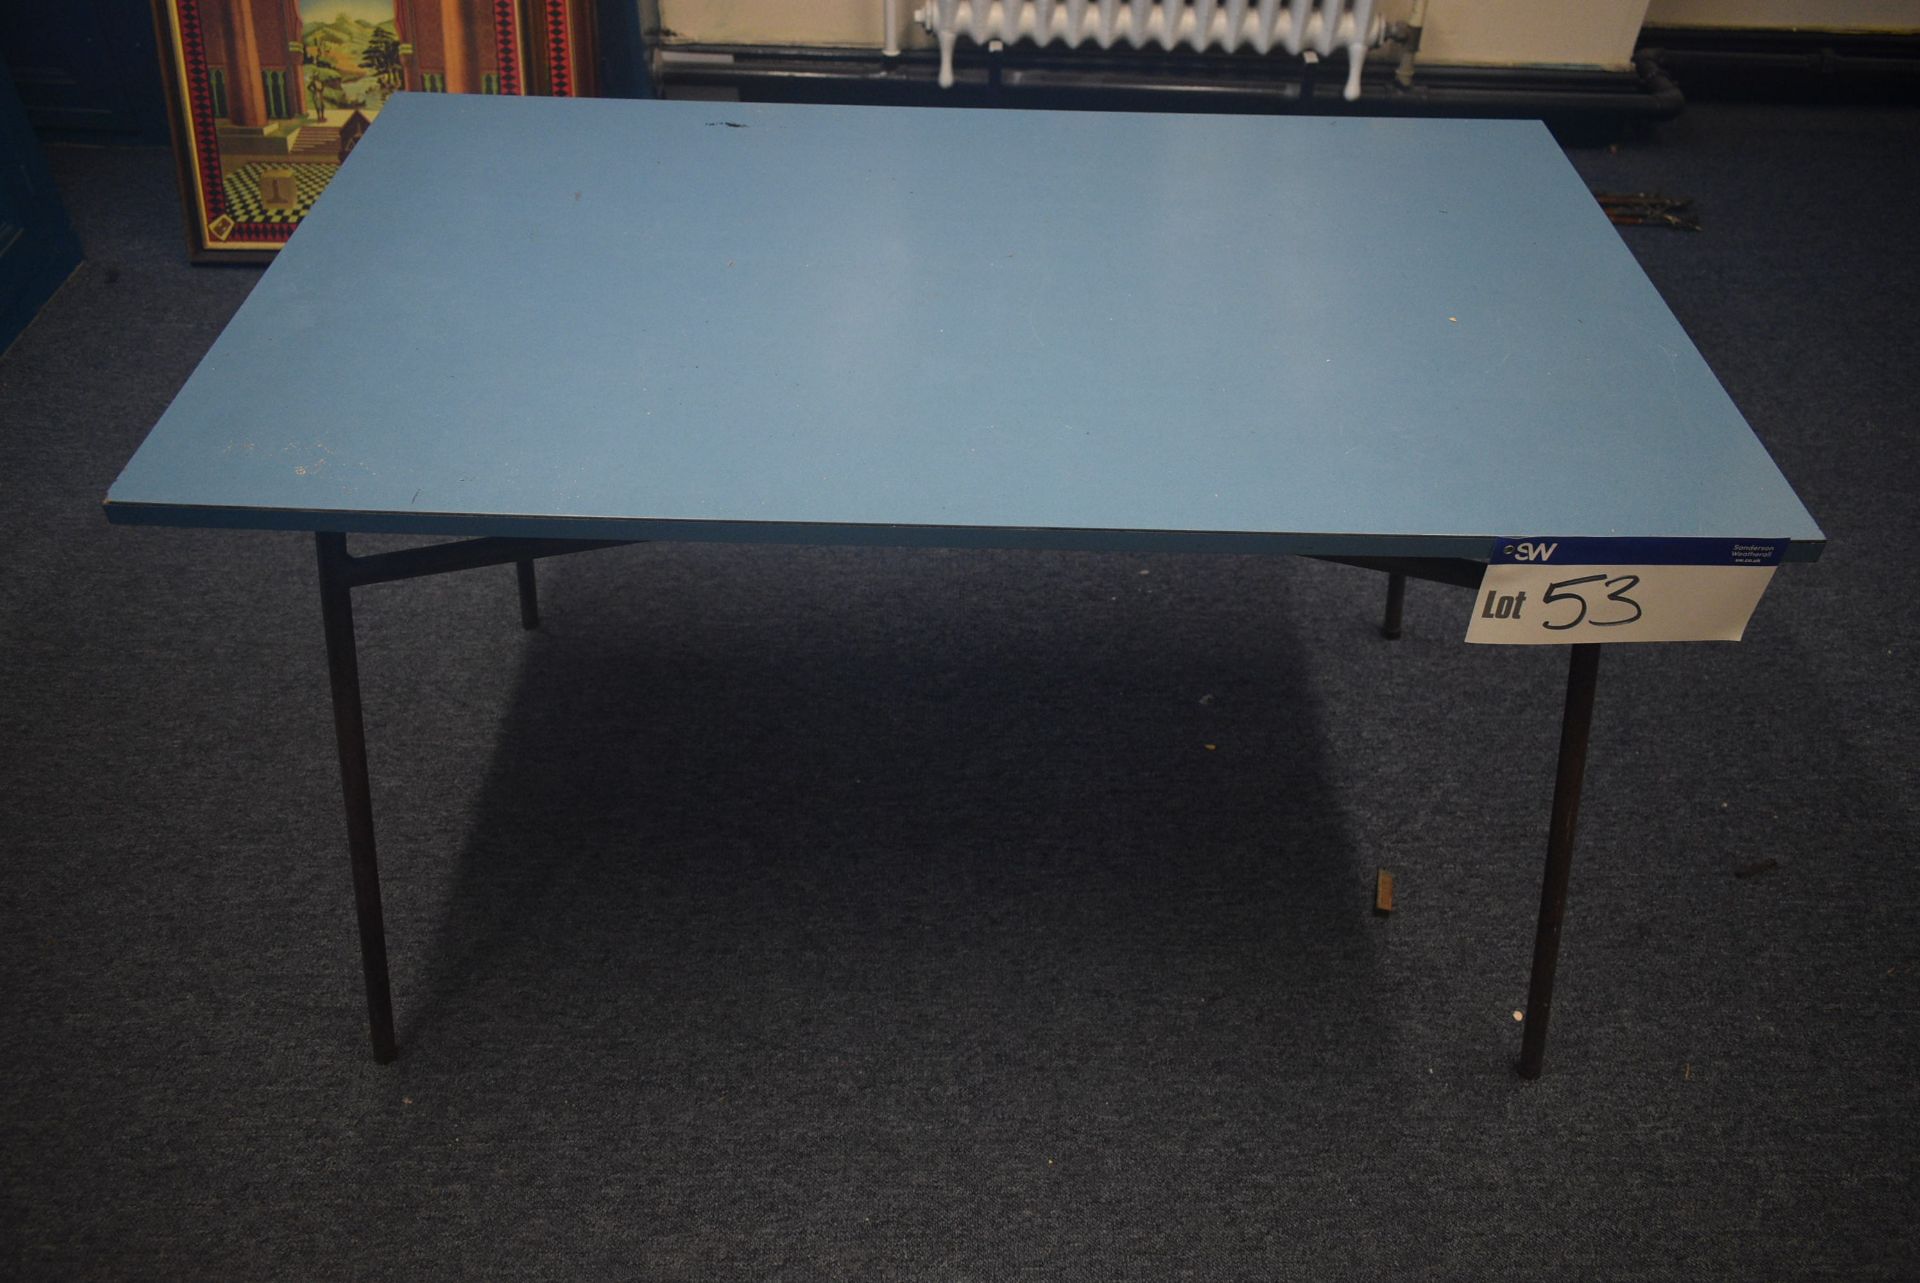 Steel Framed Table, approx. 1.22m x 710mmPlease read the following important notes:- ***Overseas